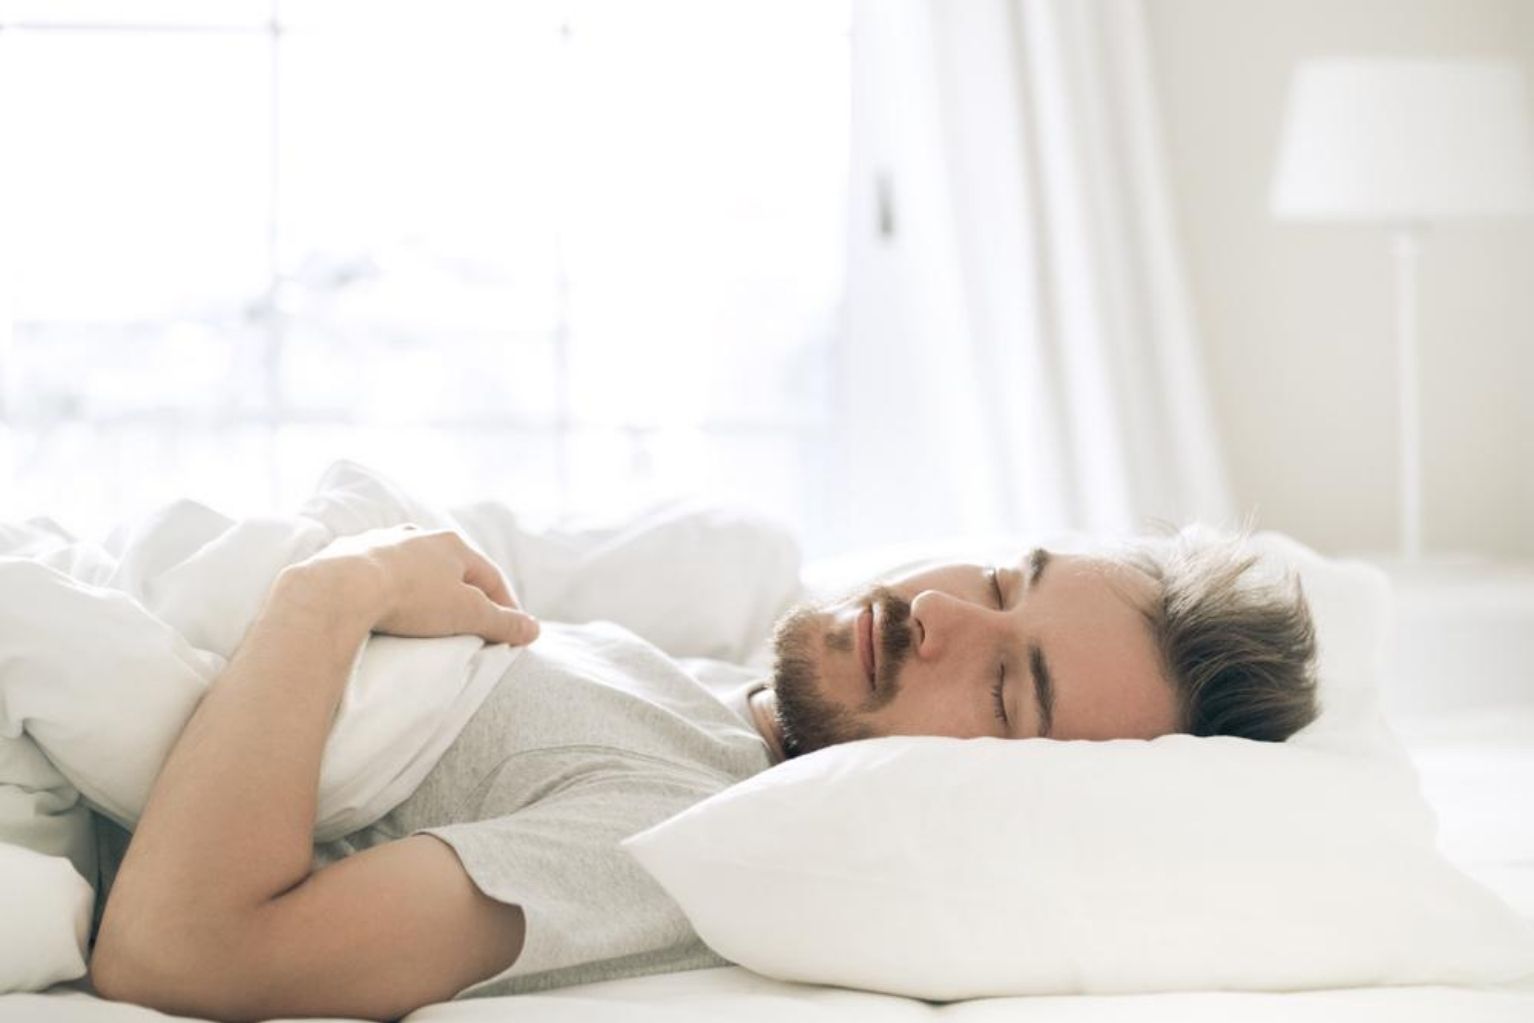 Man sleeping in a bed with white sheets and white pillows